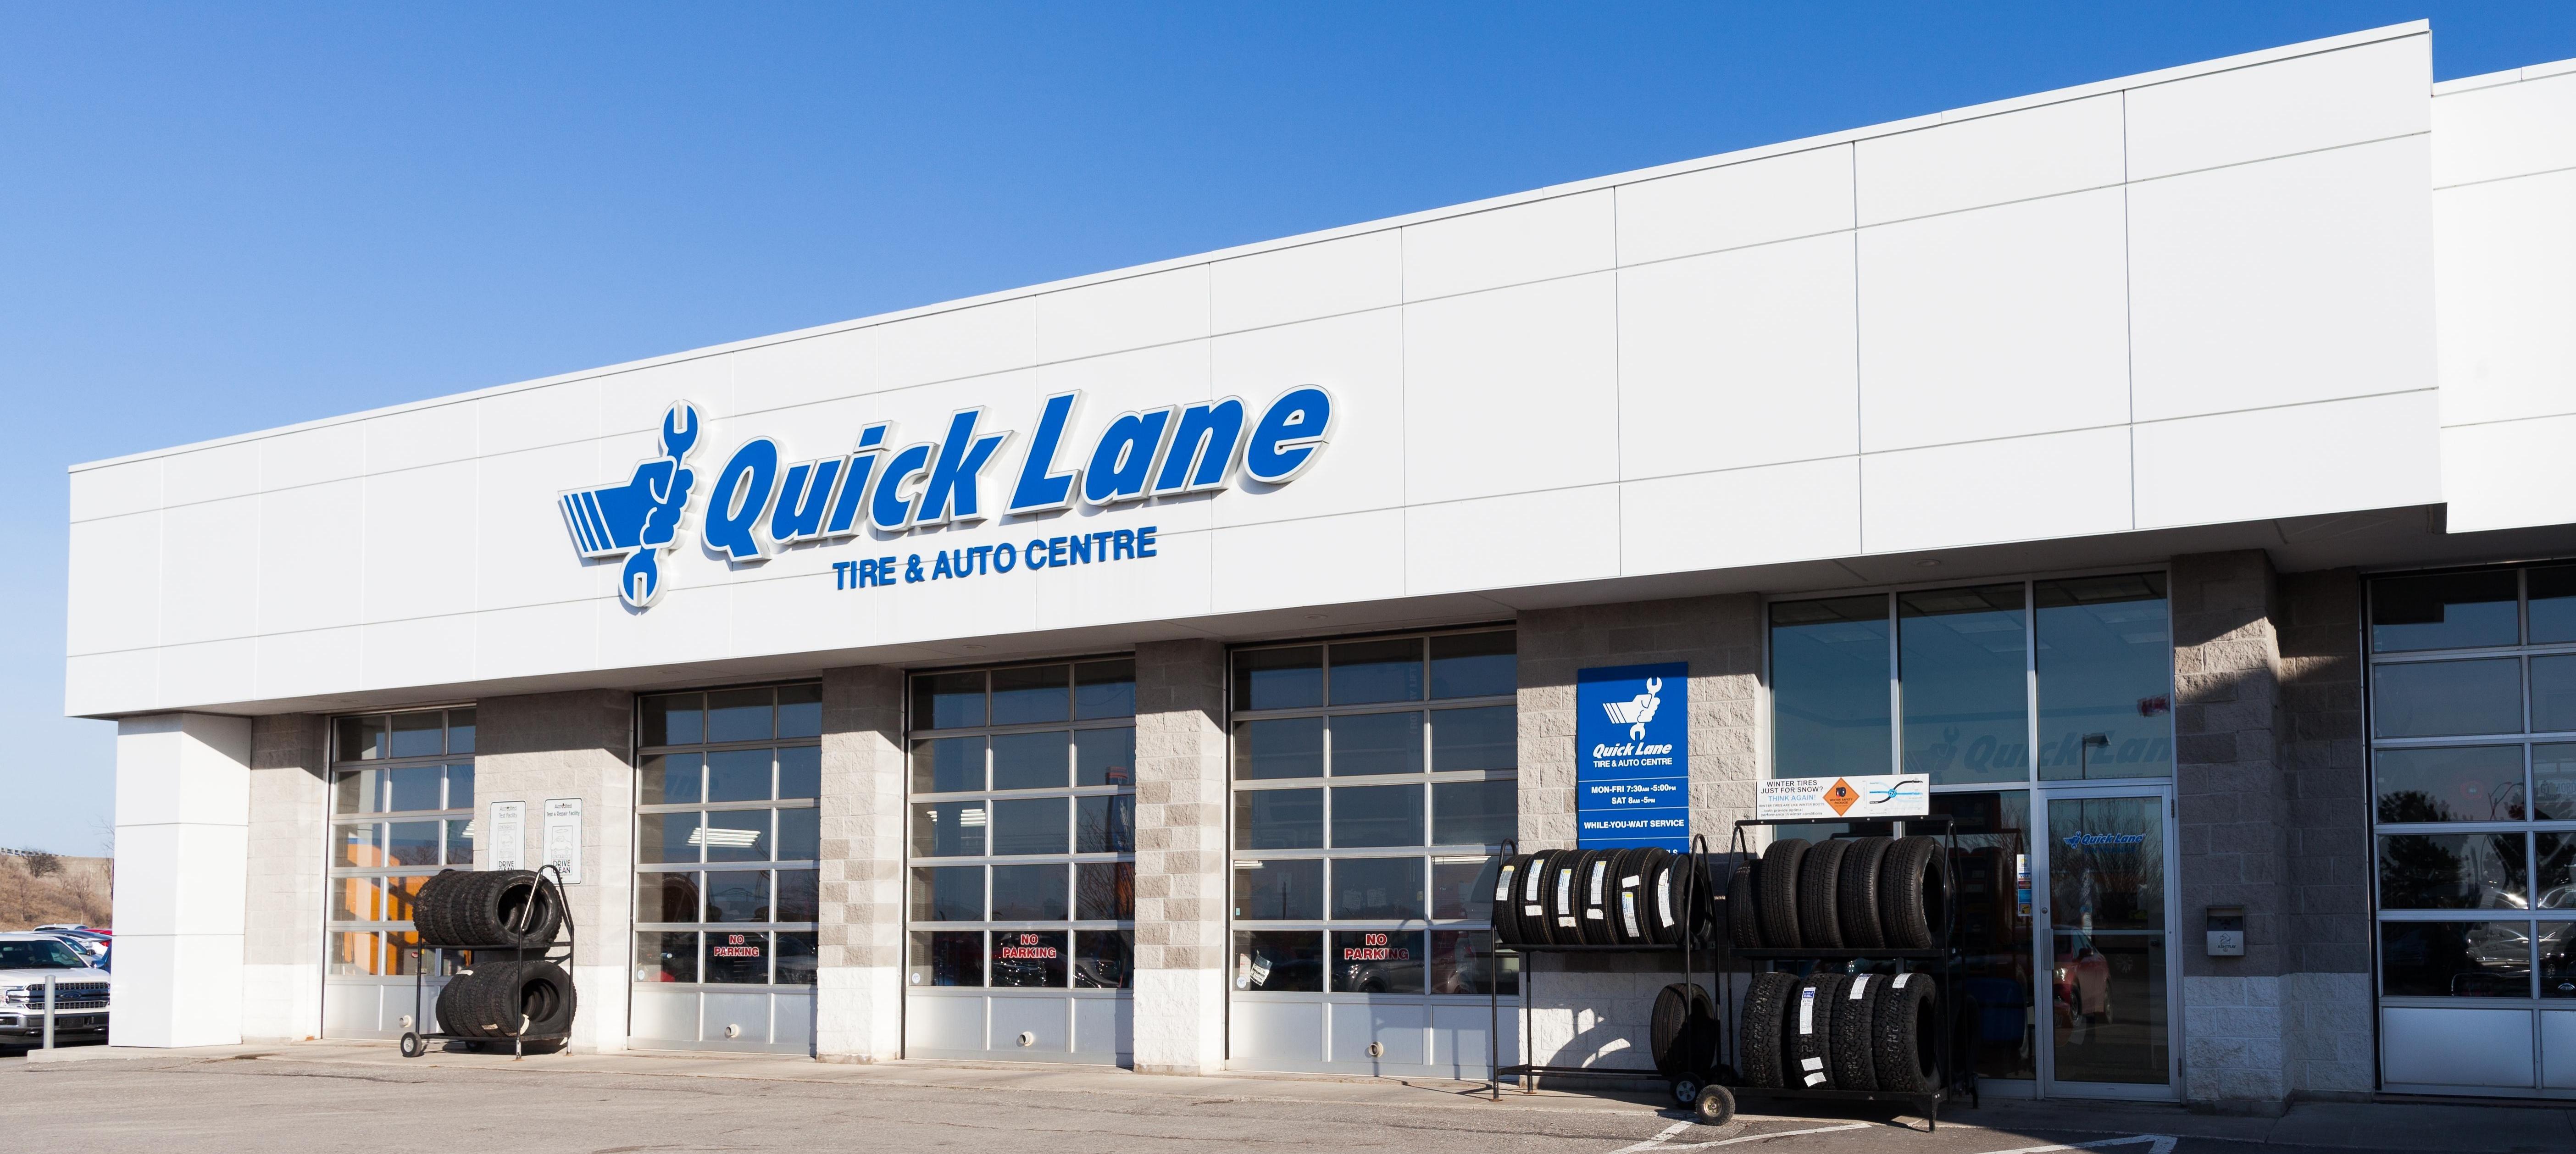 ford-quick-lane-service-center-in-lindsay-ford-service-polito-ford